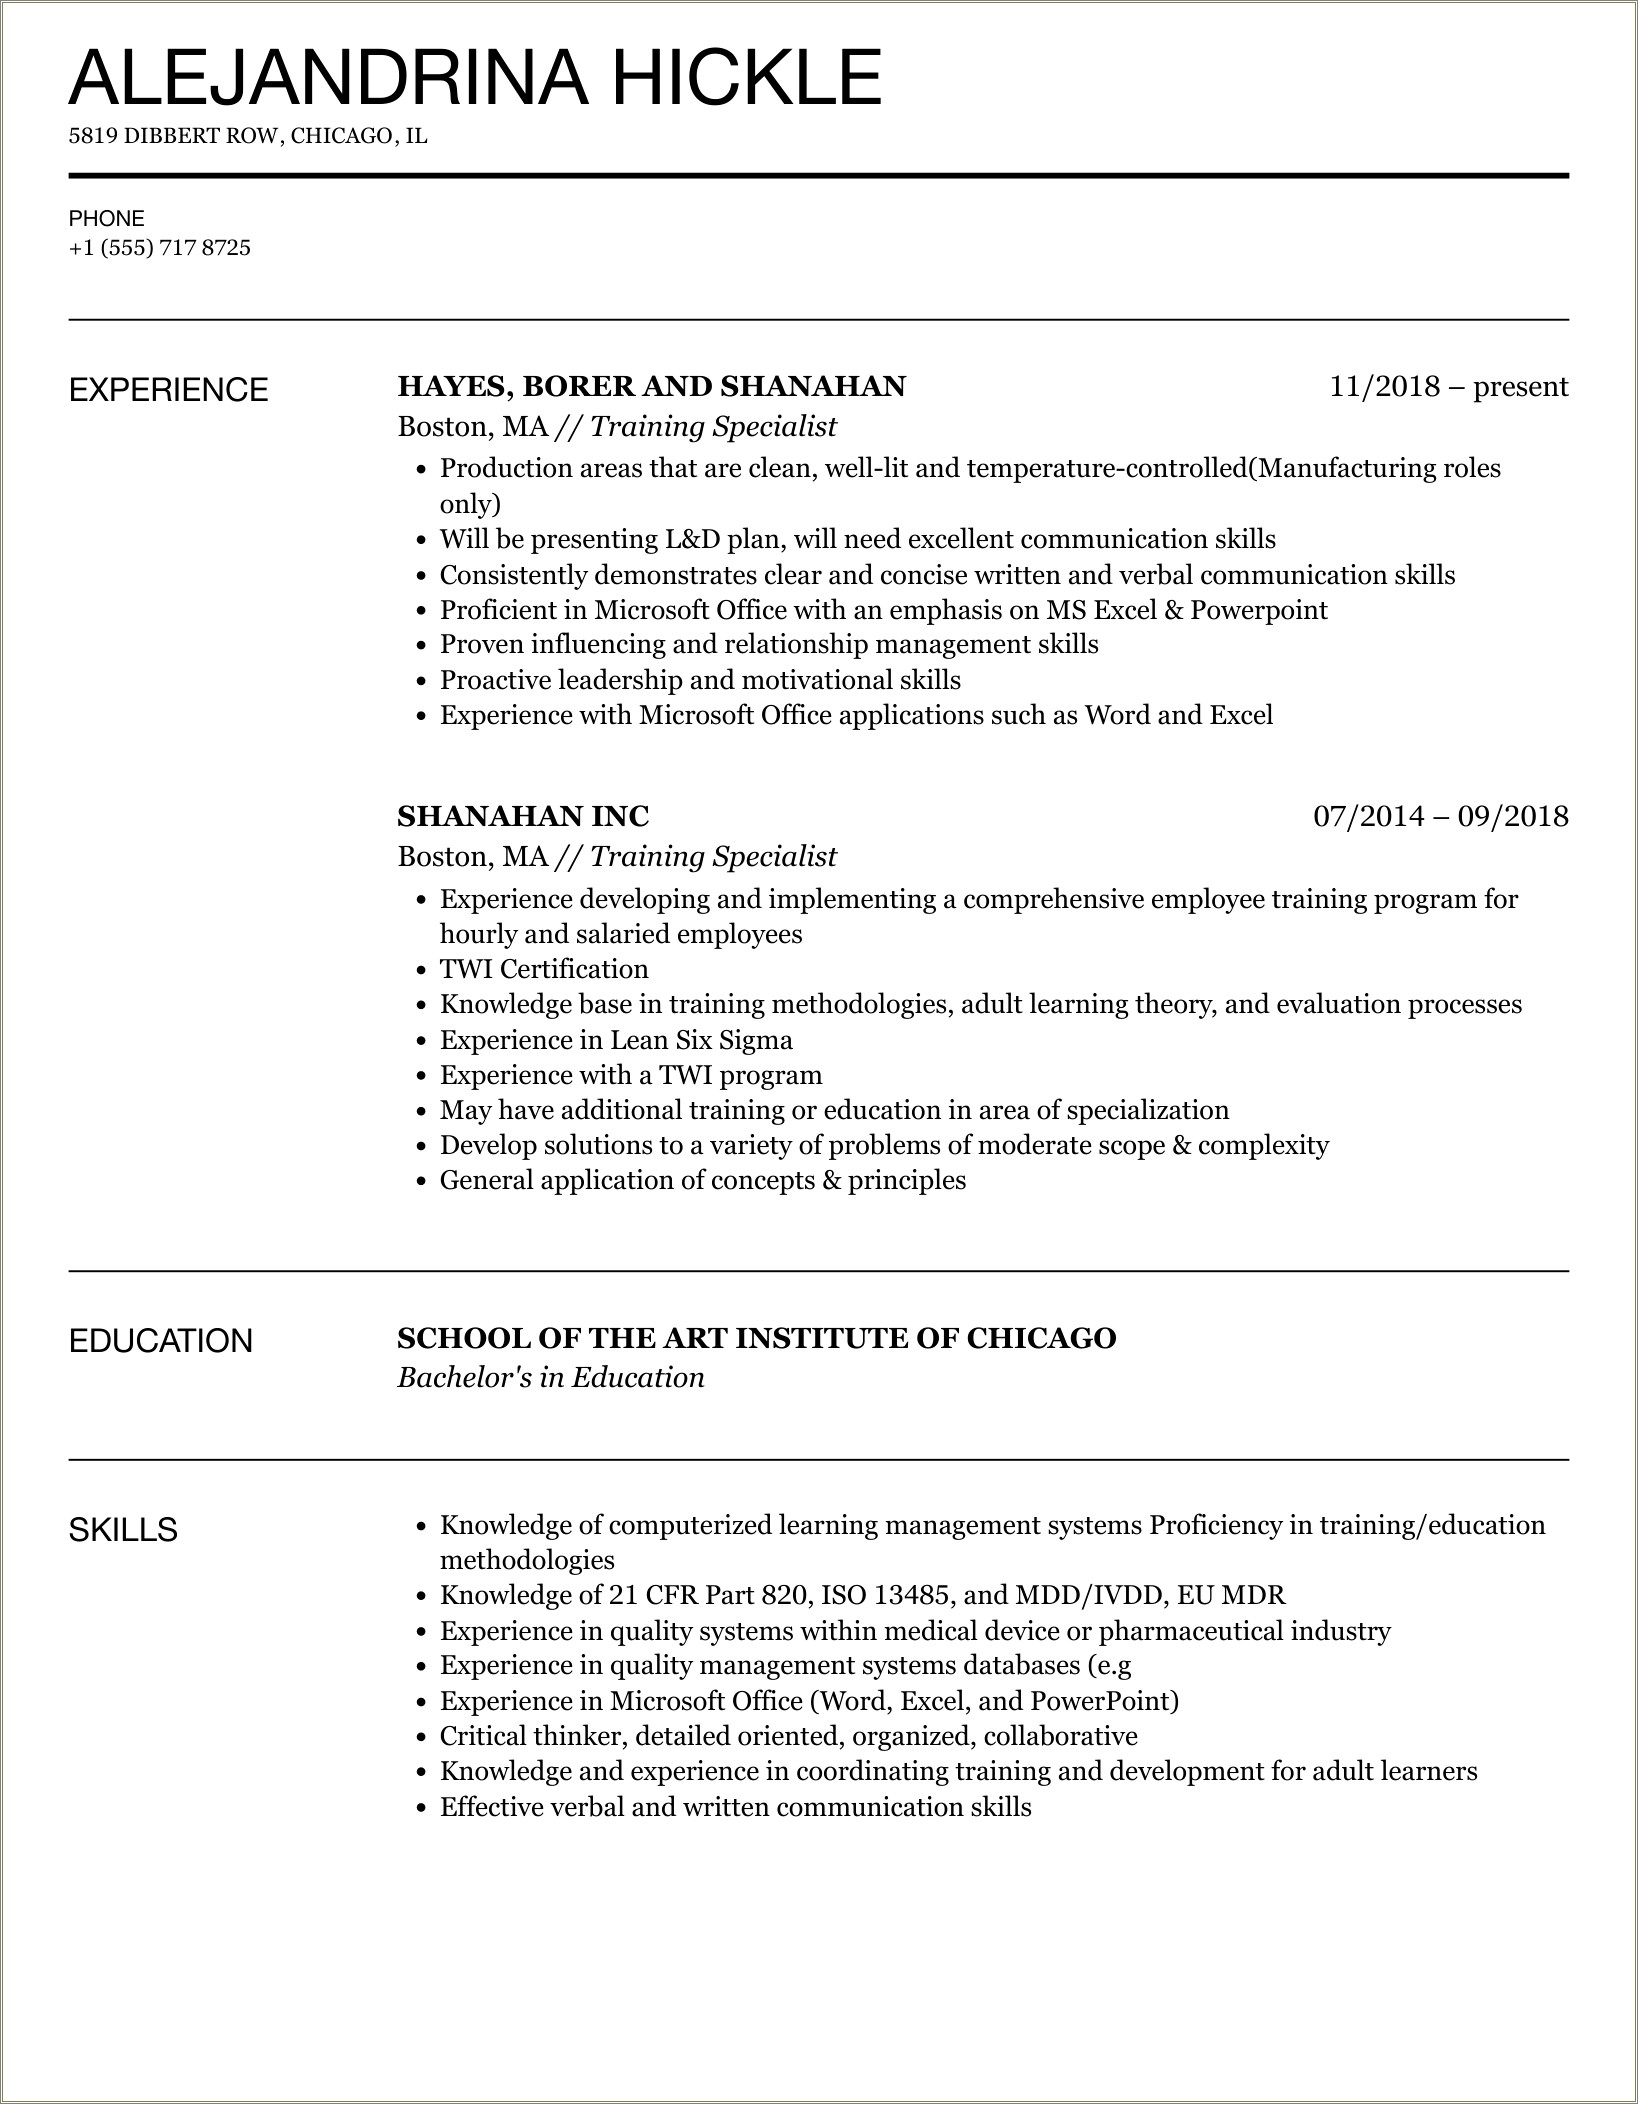 Resume Objective For Training Specialist Position